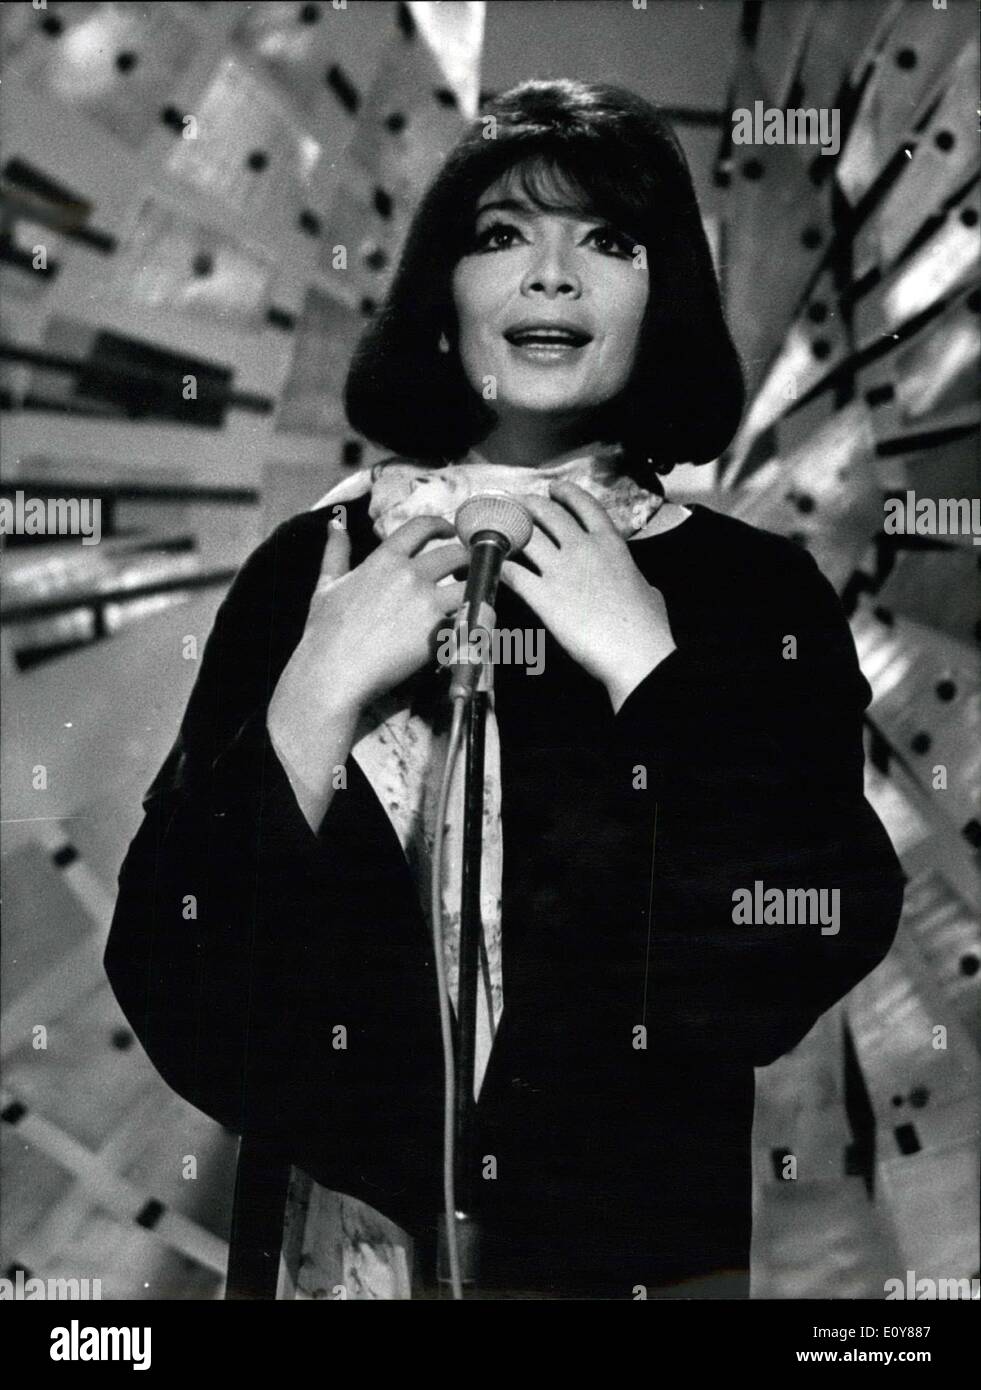 Jan. 20, 1969 - Juliette Greco In Jacques Chazot T.V. Show: Juliette Greco, the famous French singer will be one of the star performers in the T.V. show staged by the dancer producer Jacques Chazot. Photo shows Juliette Greco Rehearsing for the show. Stock Photo